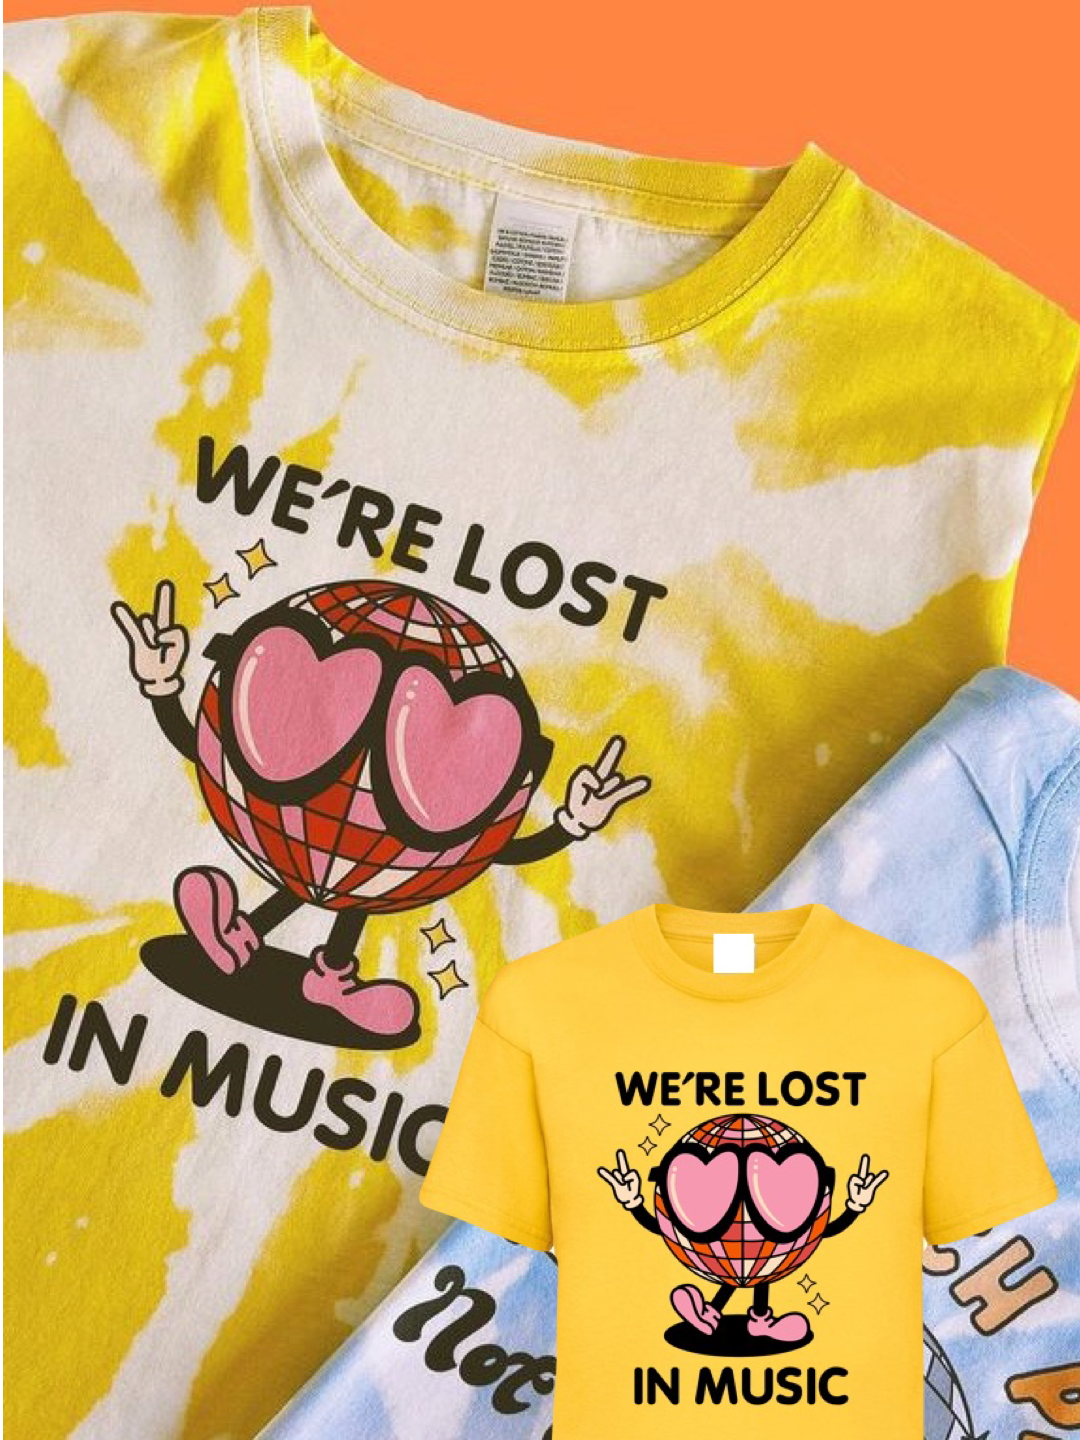 Adults LOST IN MUSIC T Shirt